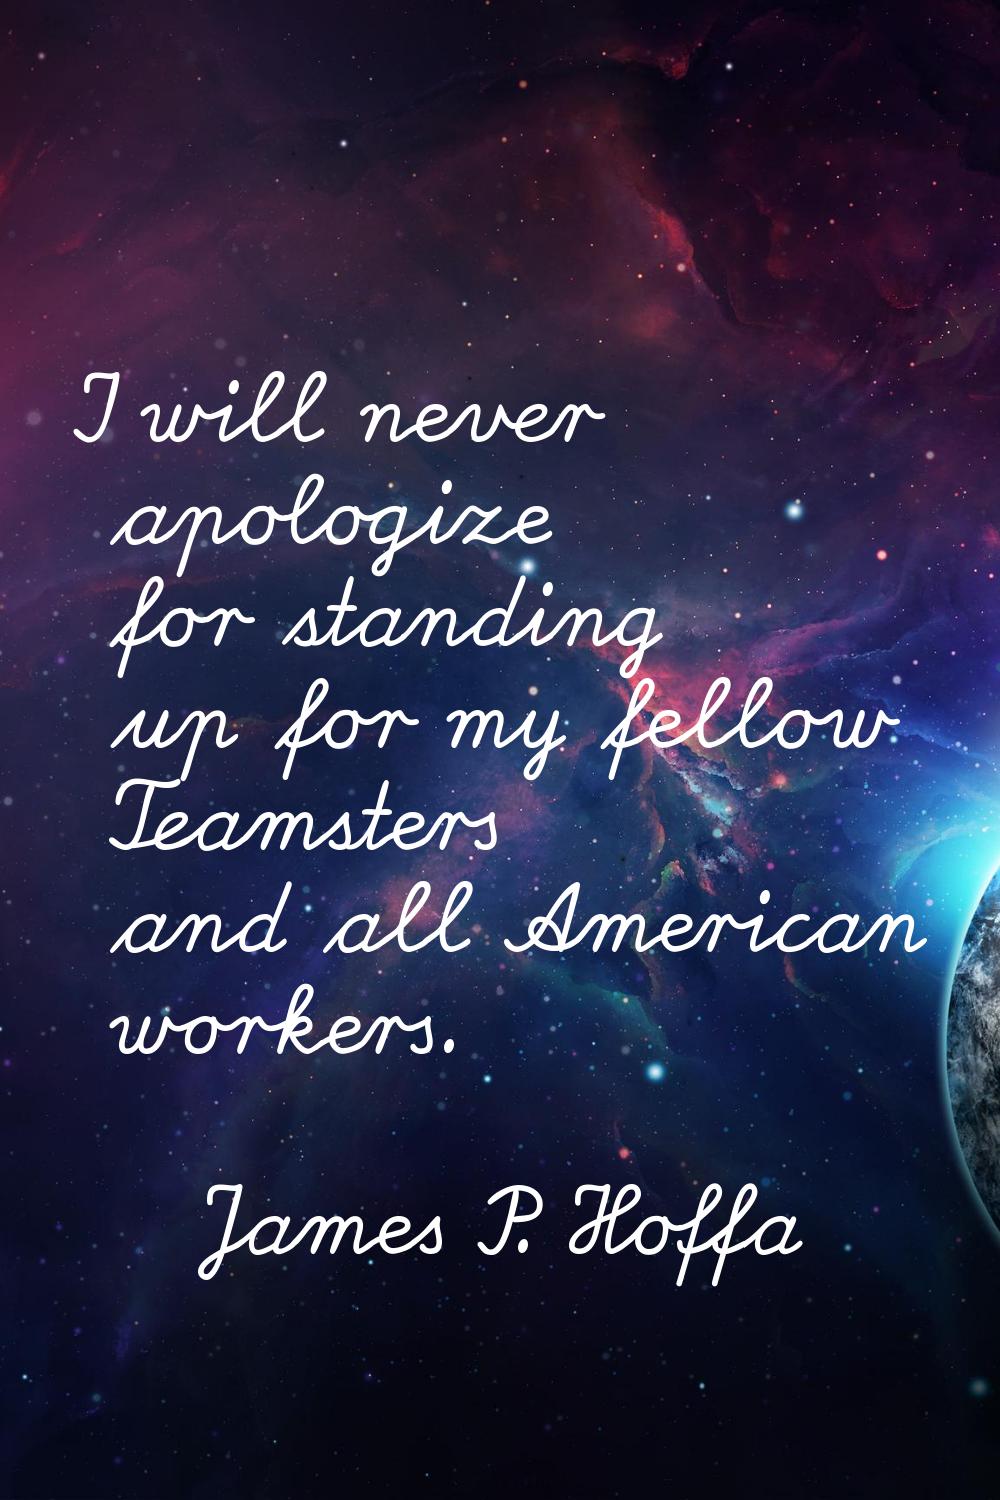 I will never apologize for standing up for my fellow Teamsters and all American workers.